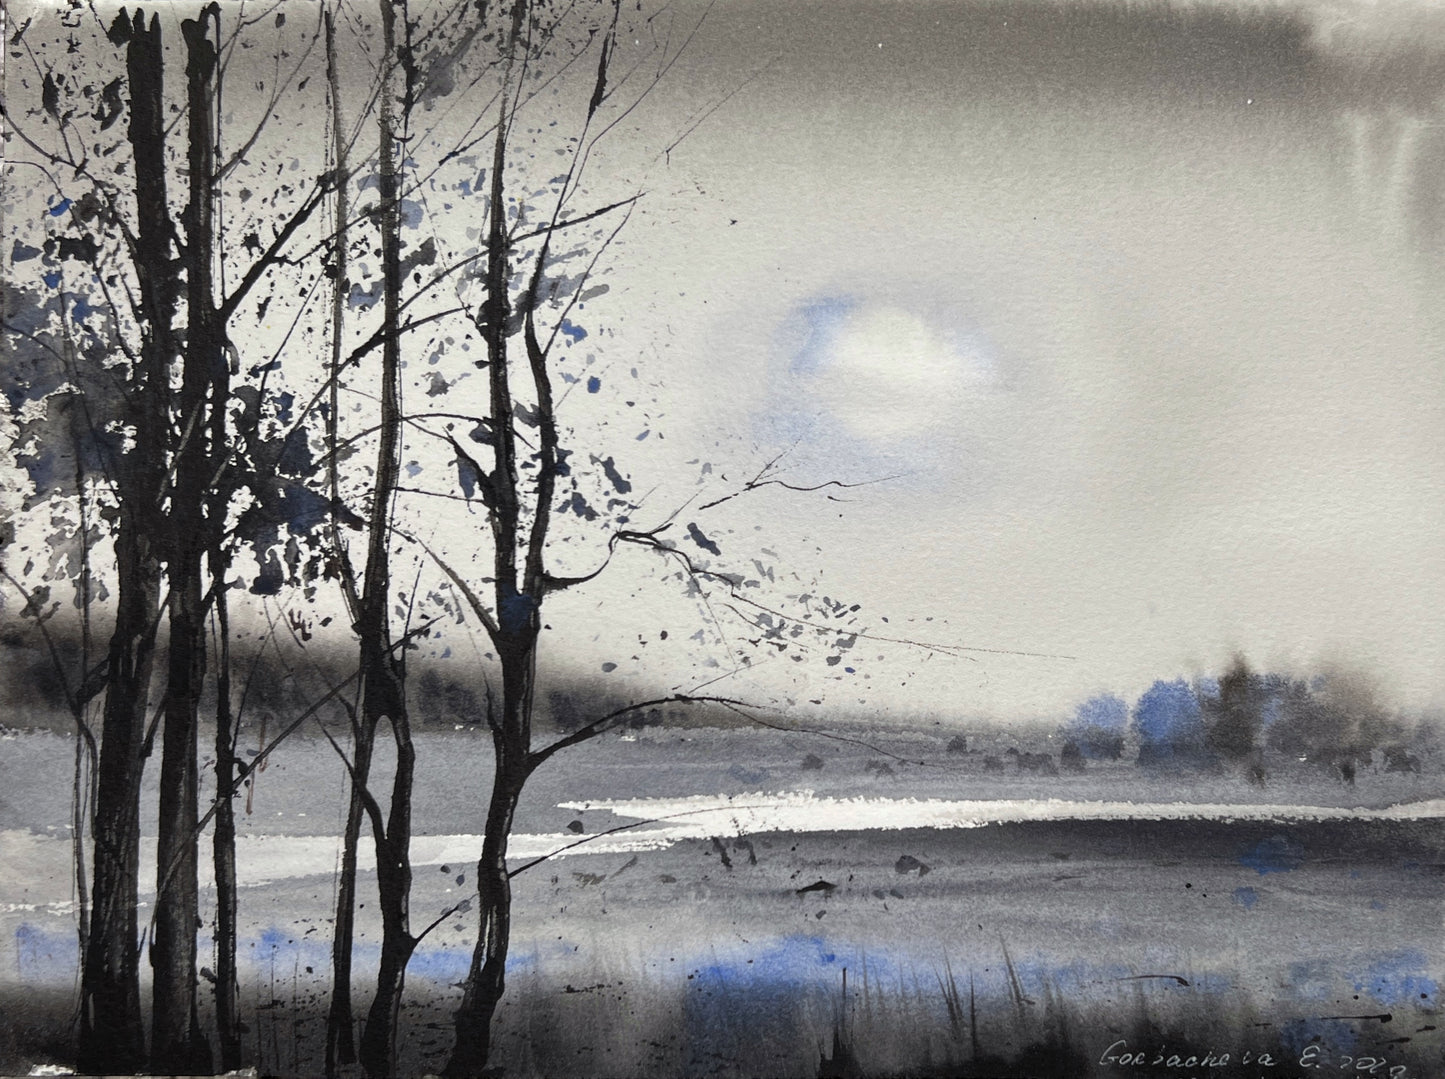 Monochrome Watercolor Original Painting - In the moonlight